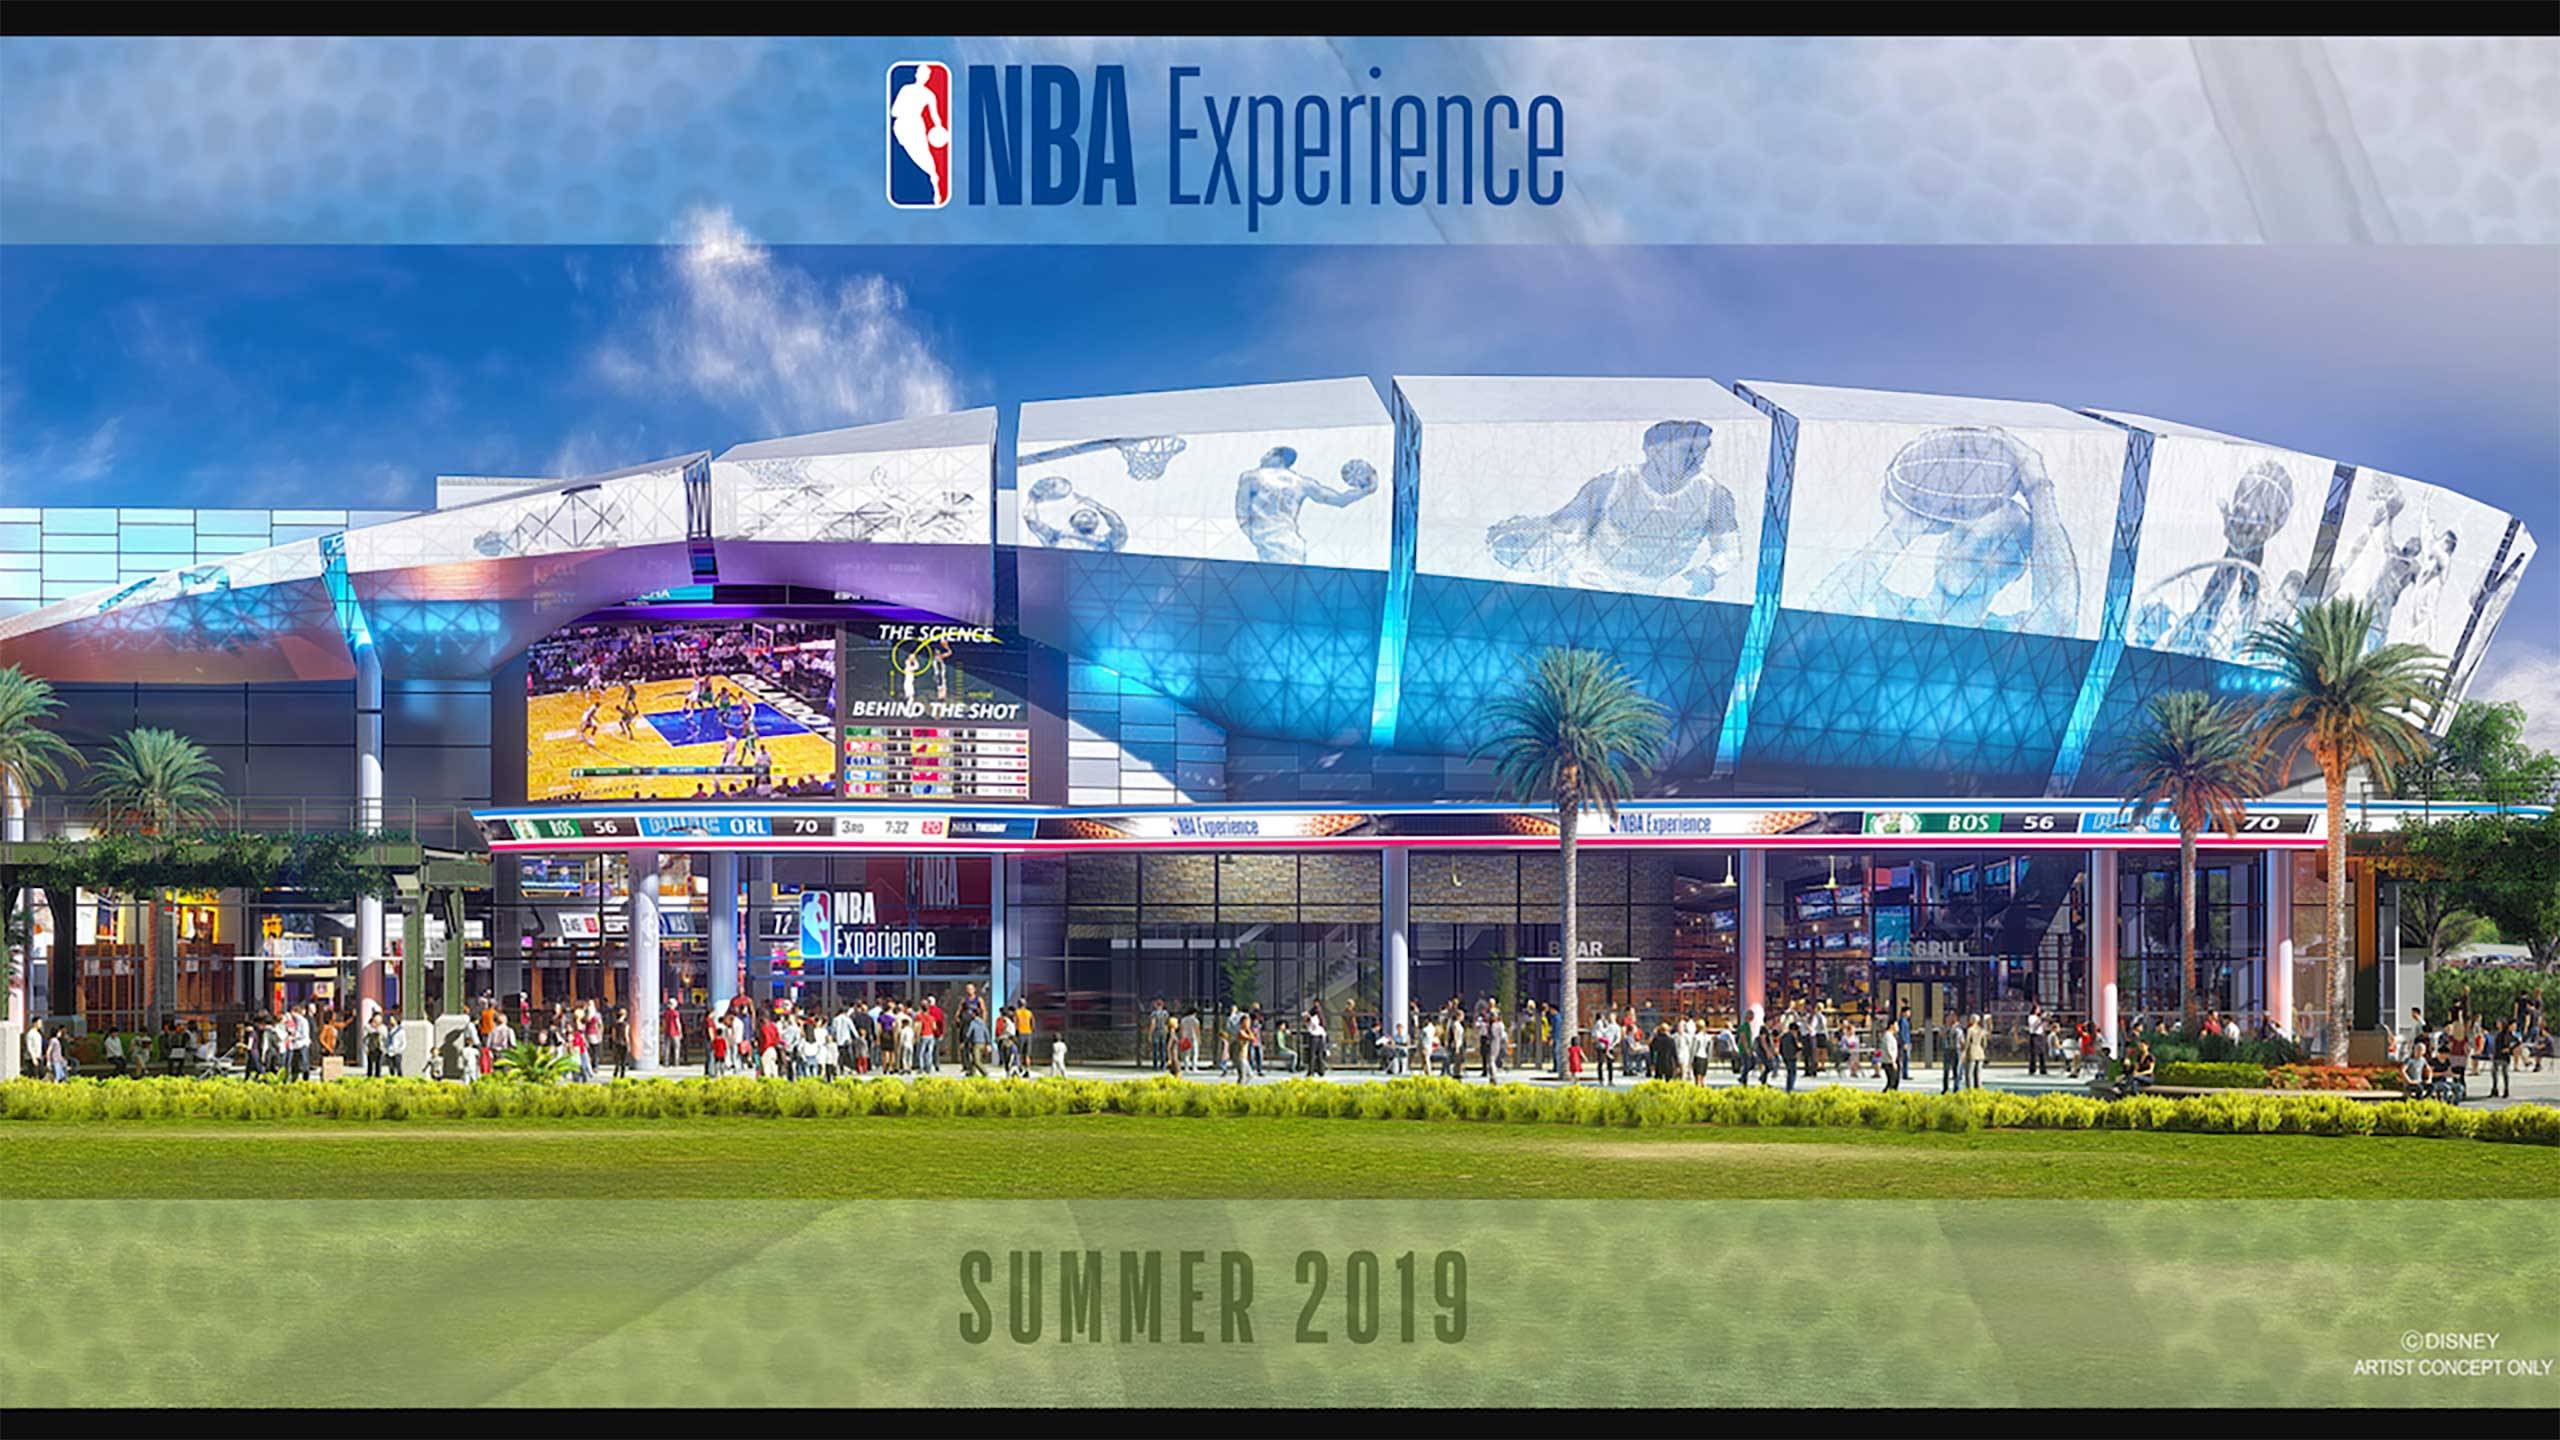 PHOTOS - Concept art and opening details for The NBA Experience at Disney Springs